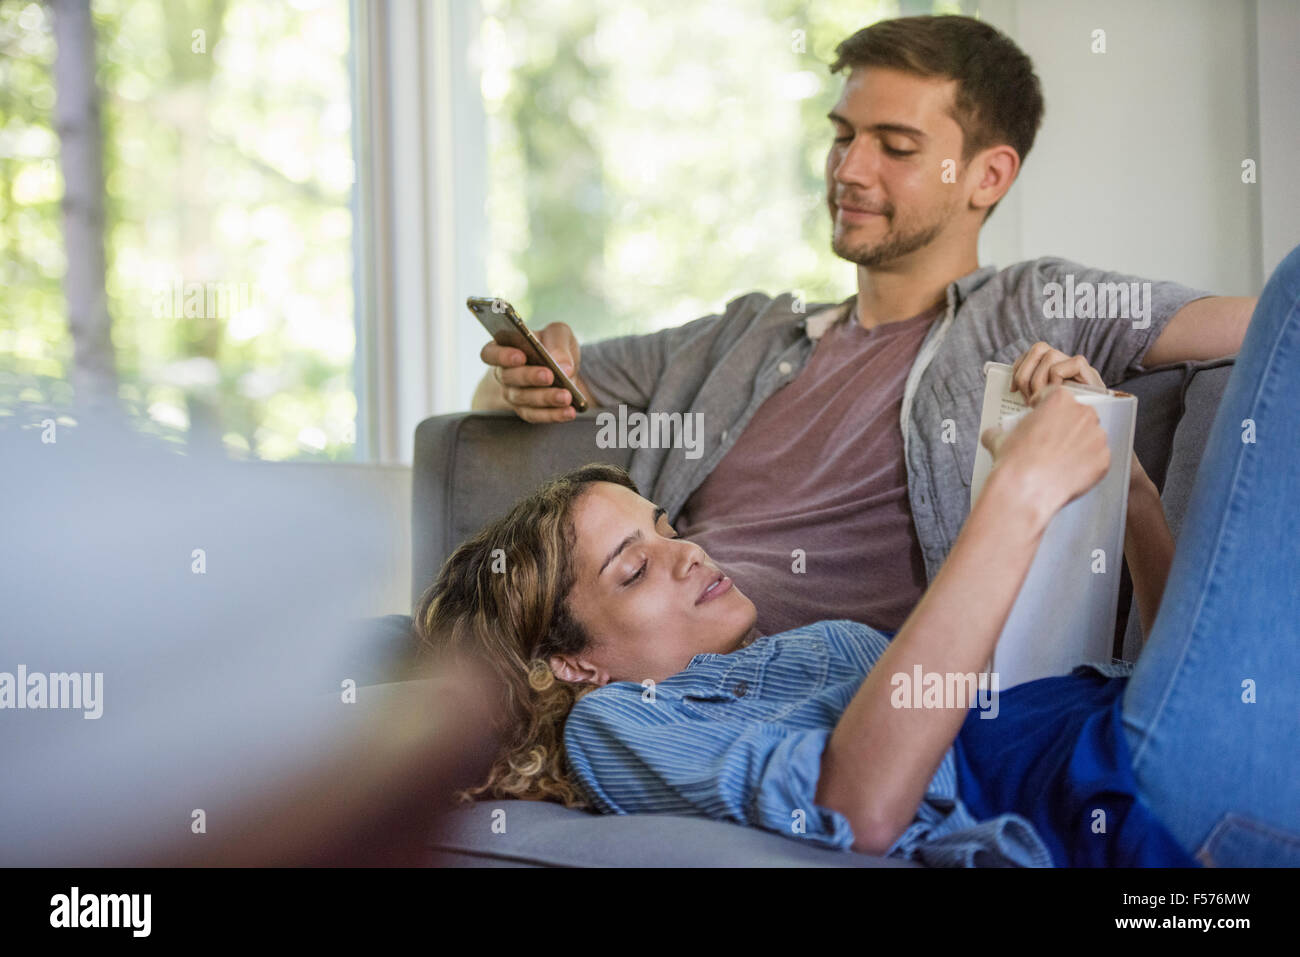 A couple, a man checking his phone and a woman lying down reading a book. Stock Photo